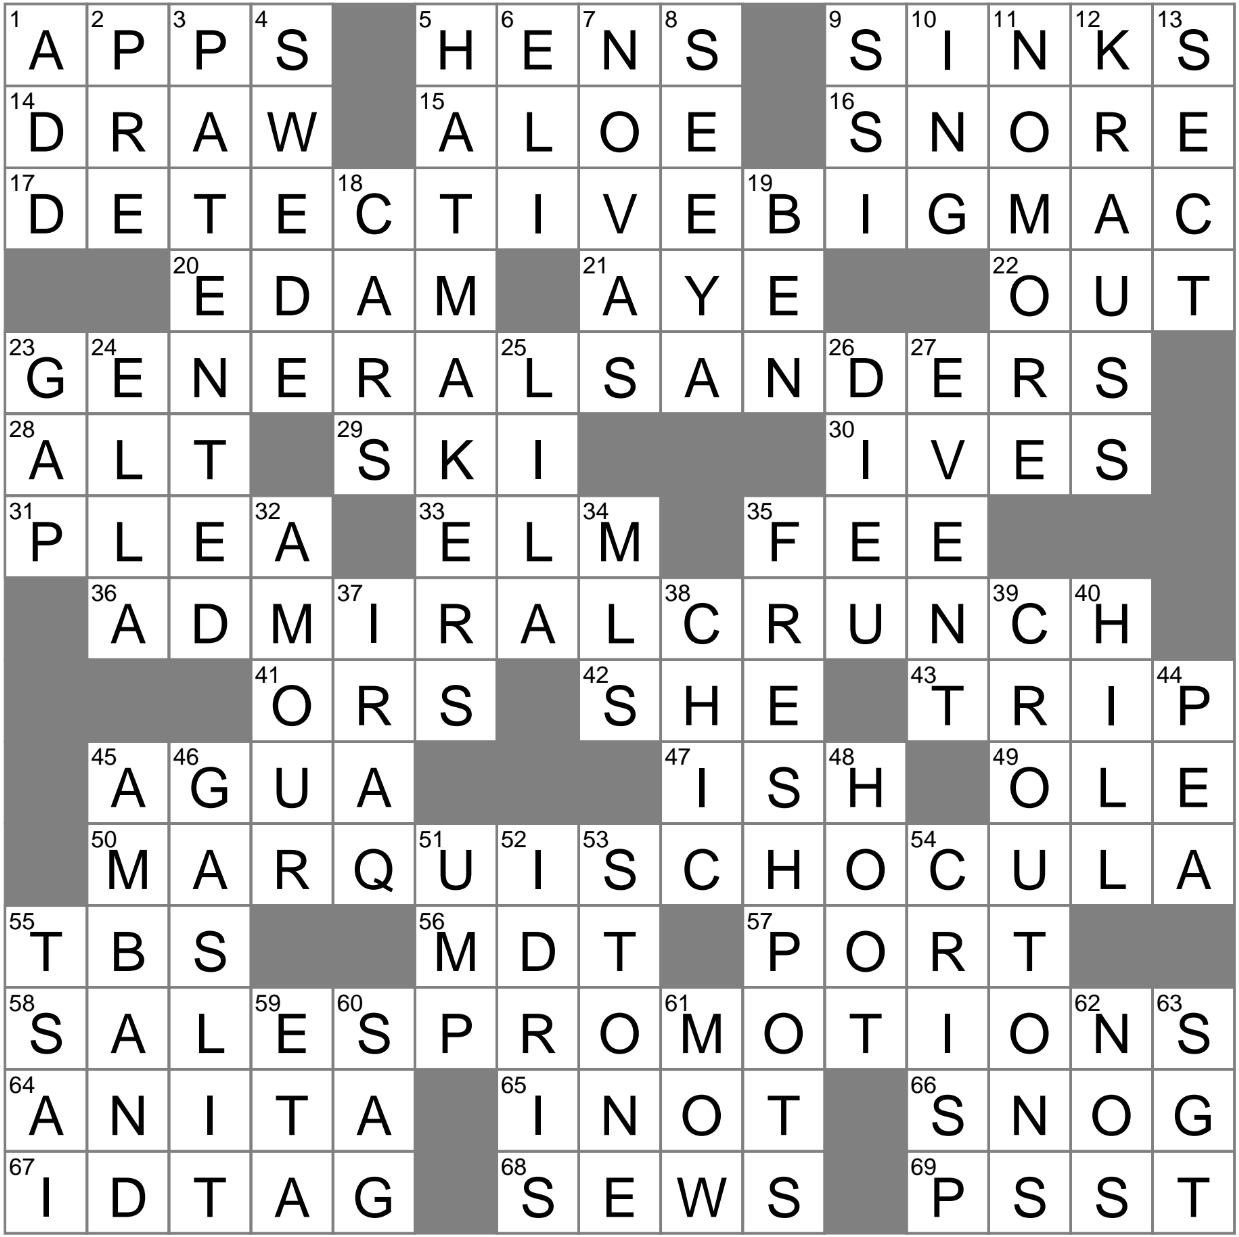 verb-on-a-dipstick-crossword-clue-archives-laxcrossword